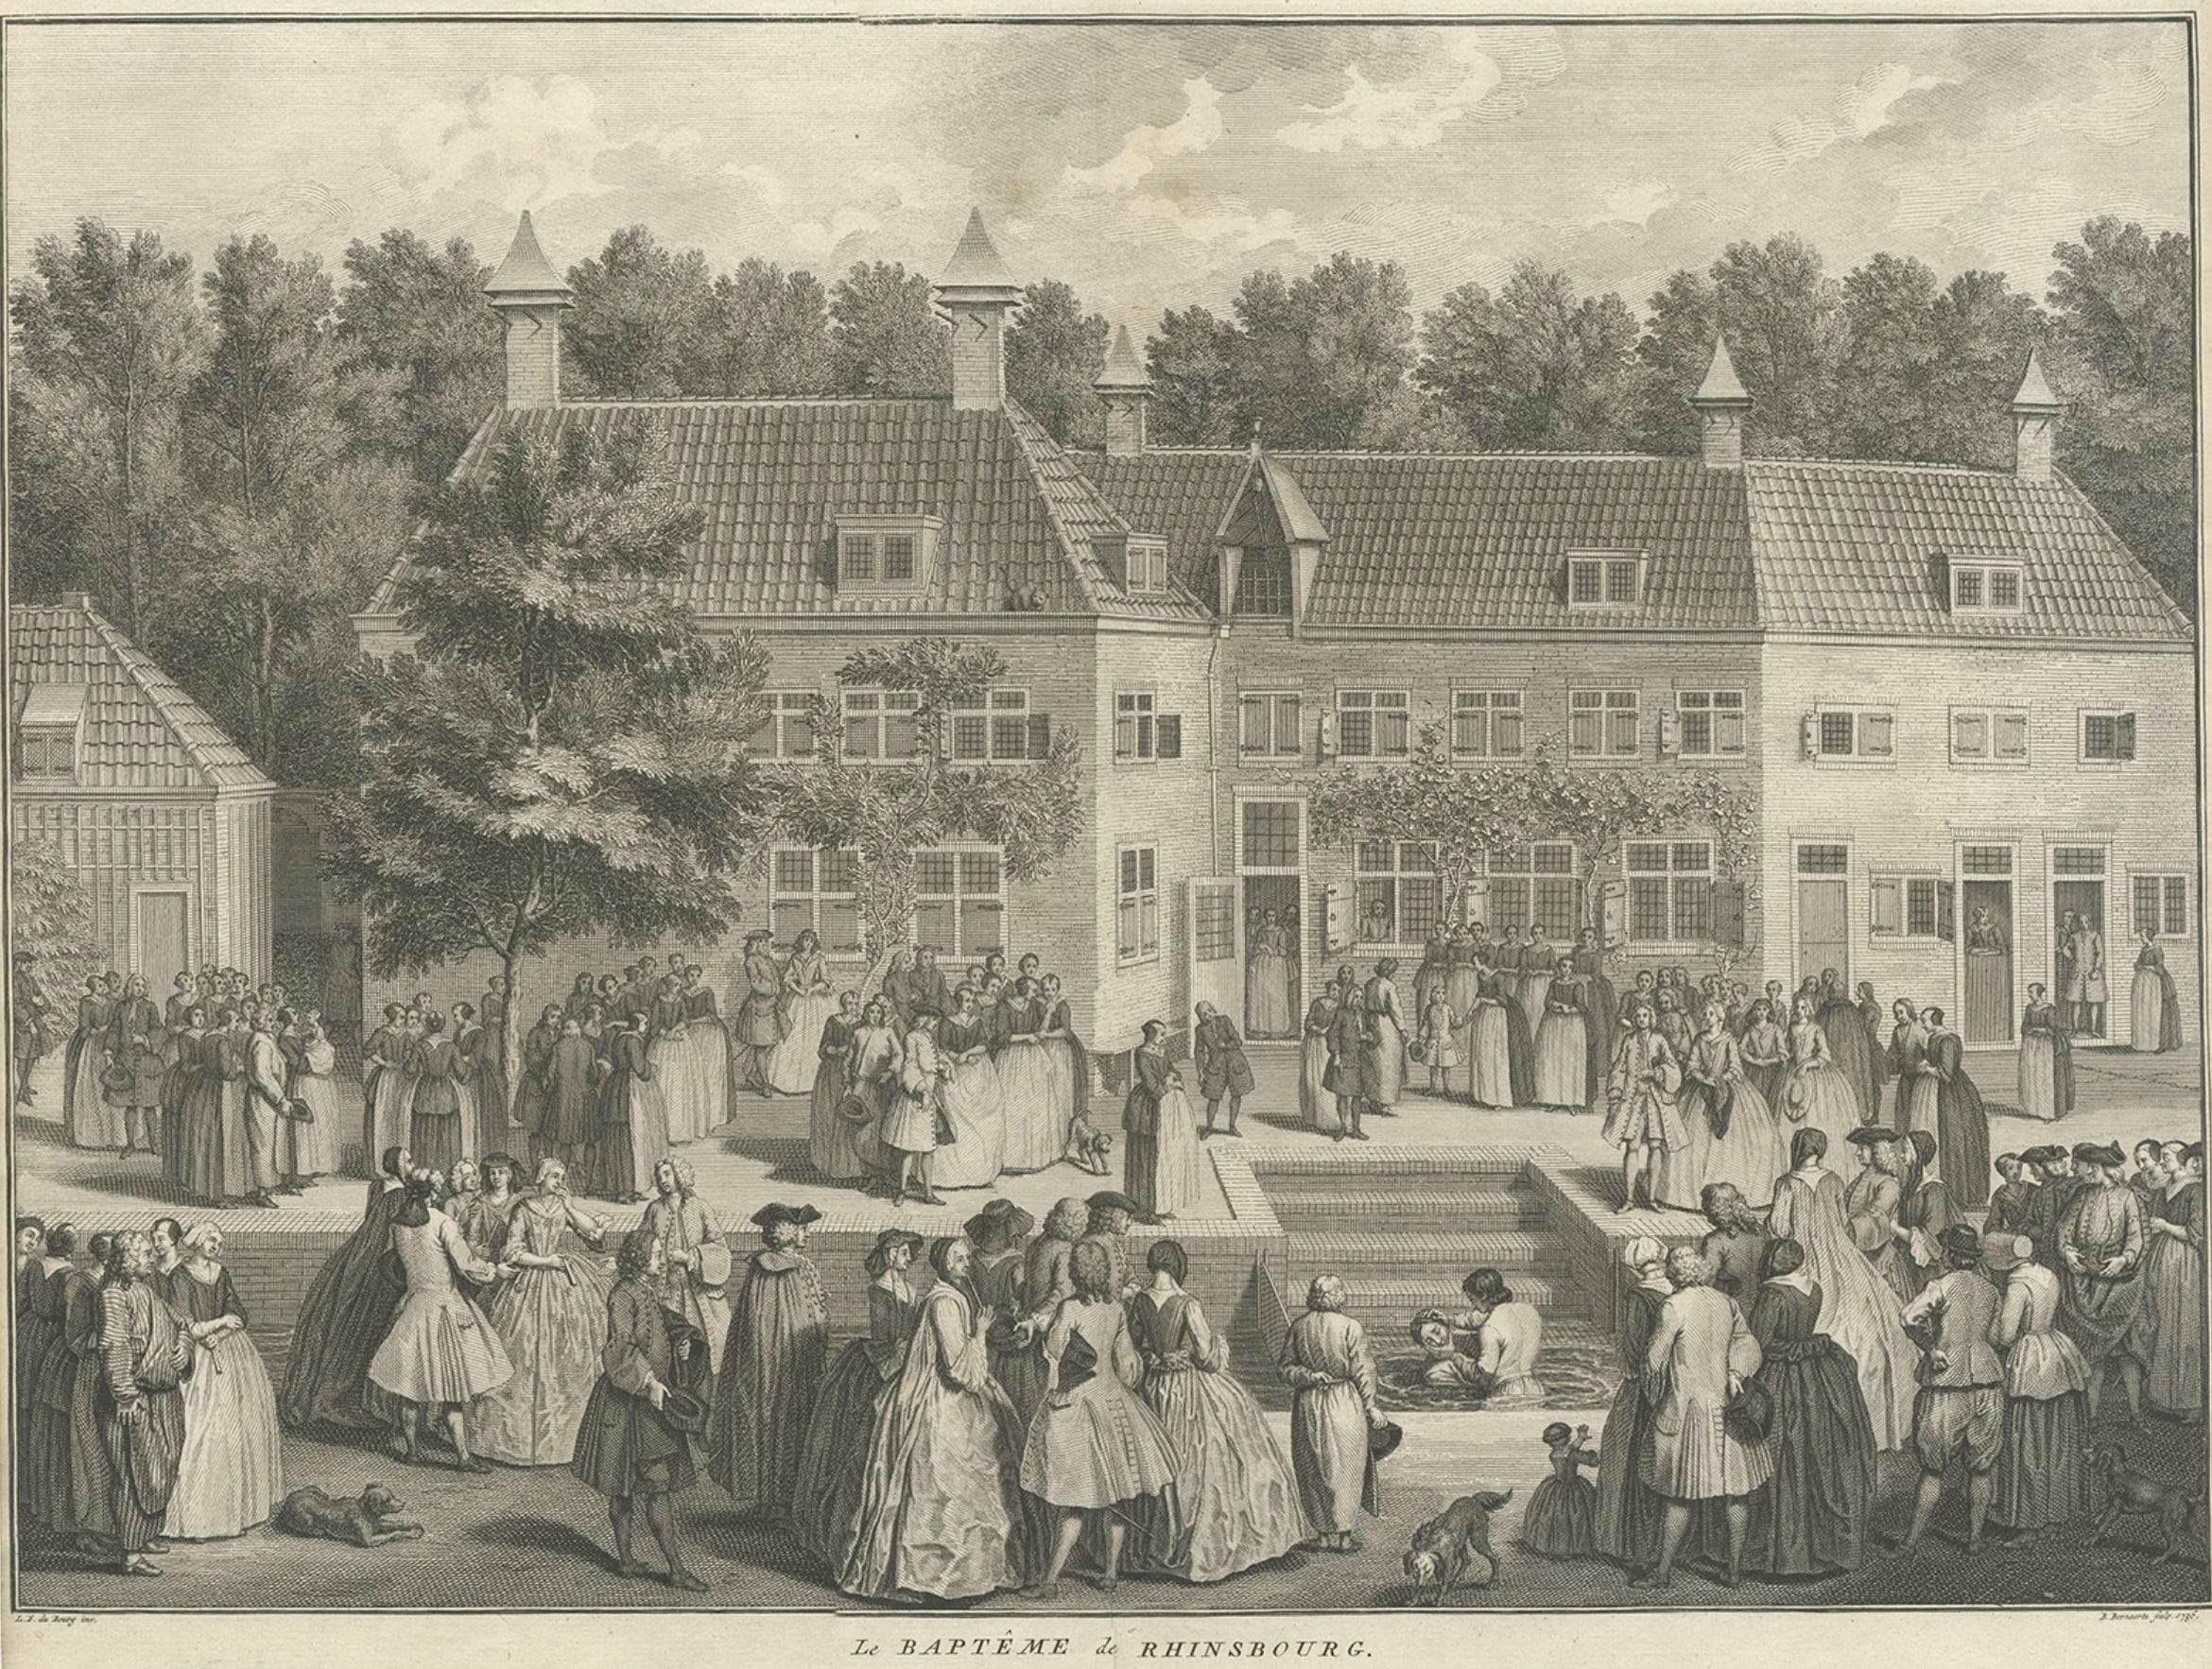 Paper Original Antique Engraving of the Baptism of Christians in The Netherlands, 17 For Sale